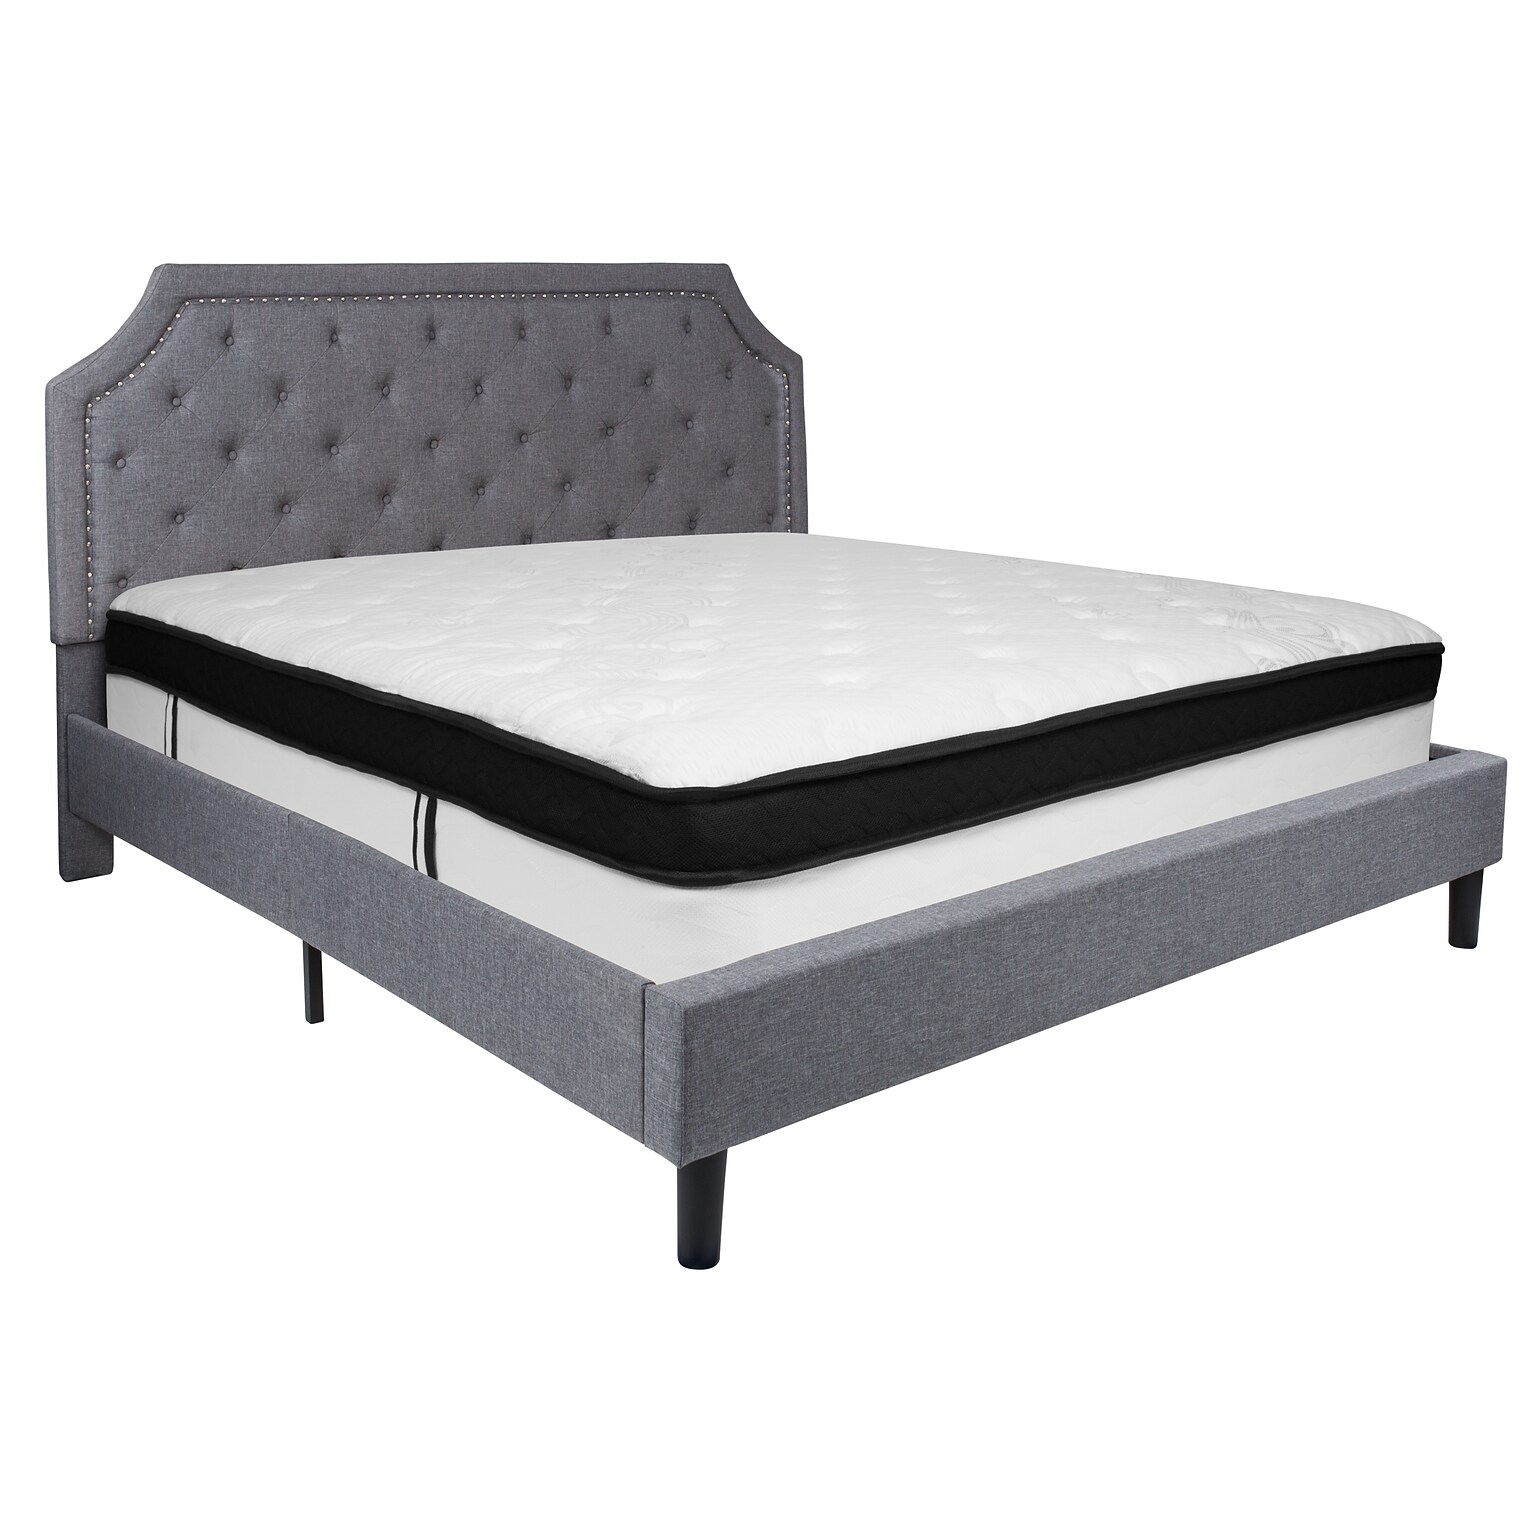 Flash Furniture Brighton Tufted Upholstered Platform Bed in Light Gray Fabric with Memory Foam Mattress, King (SLBMF12)